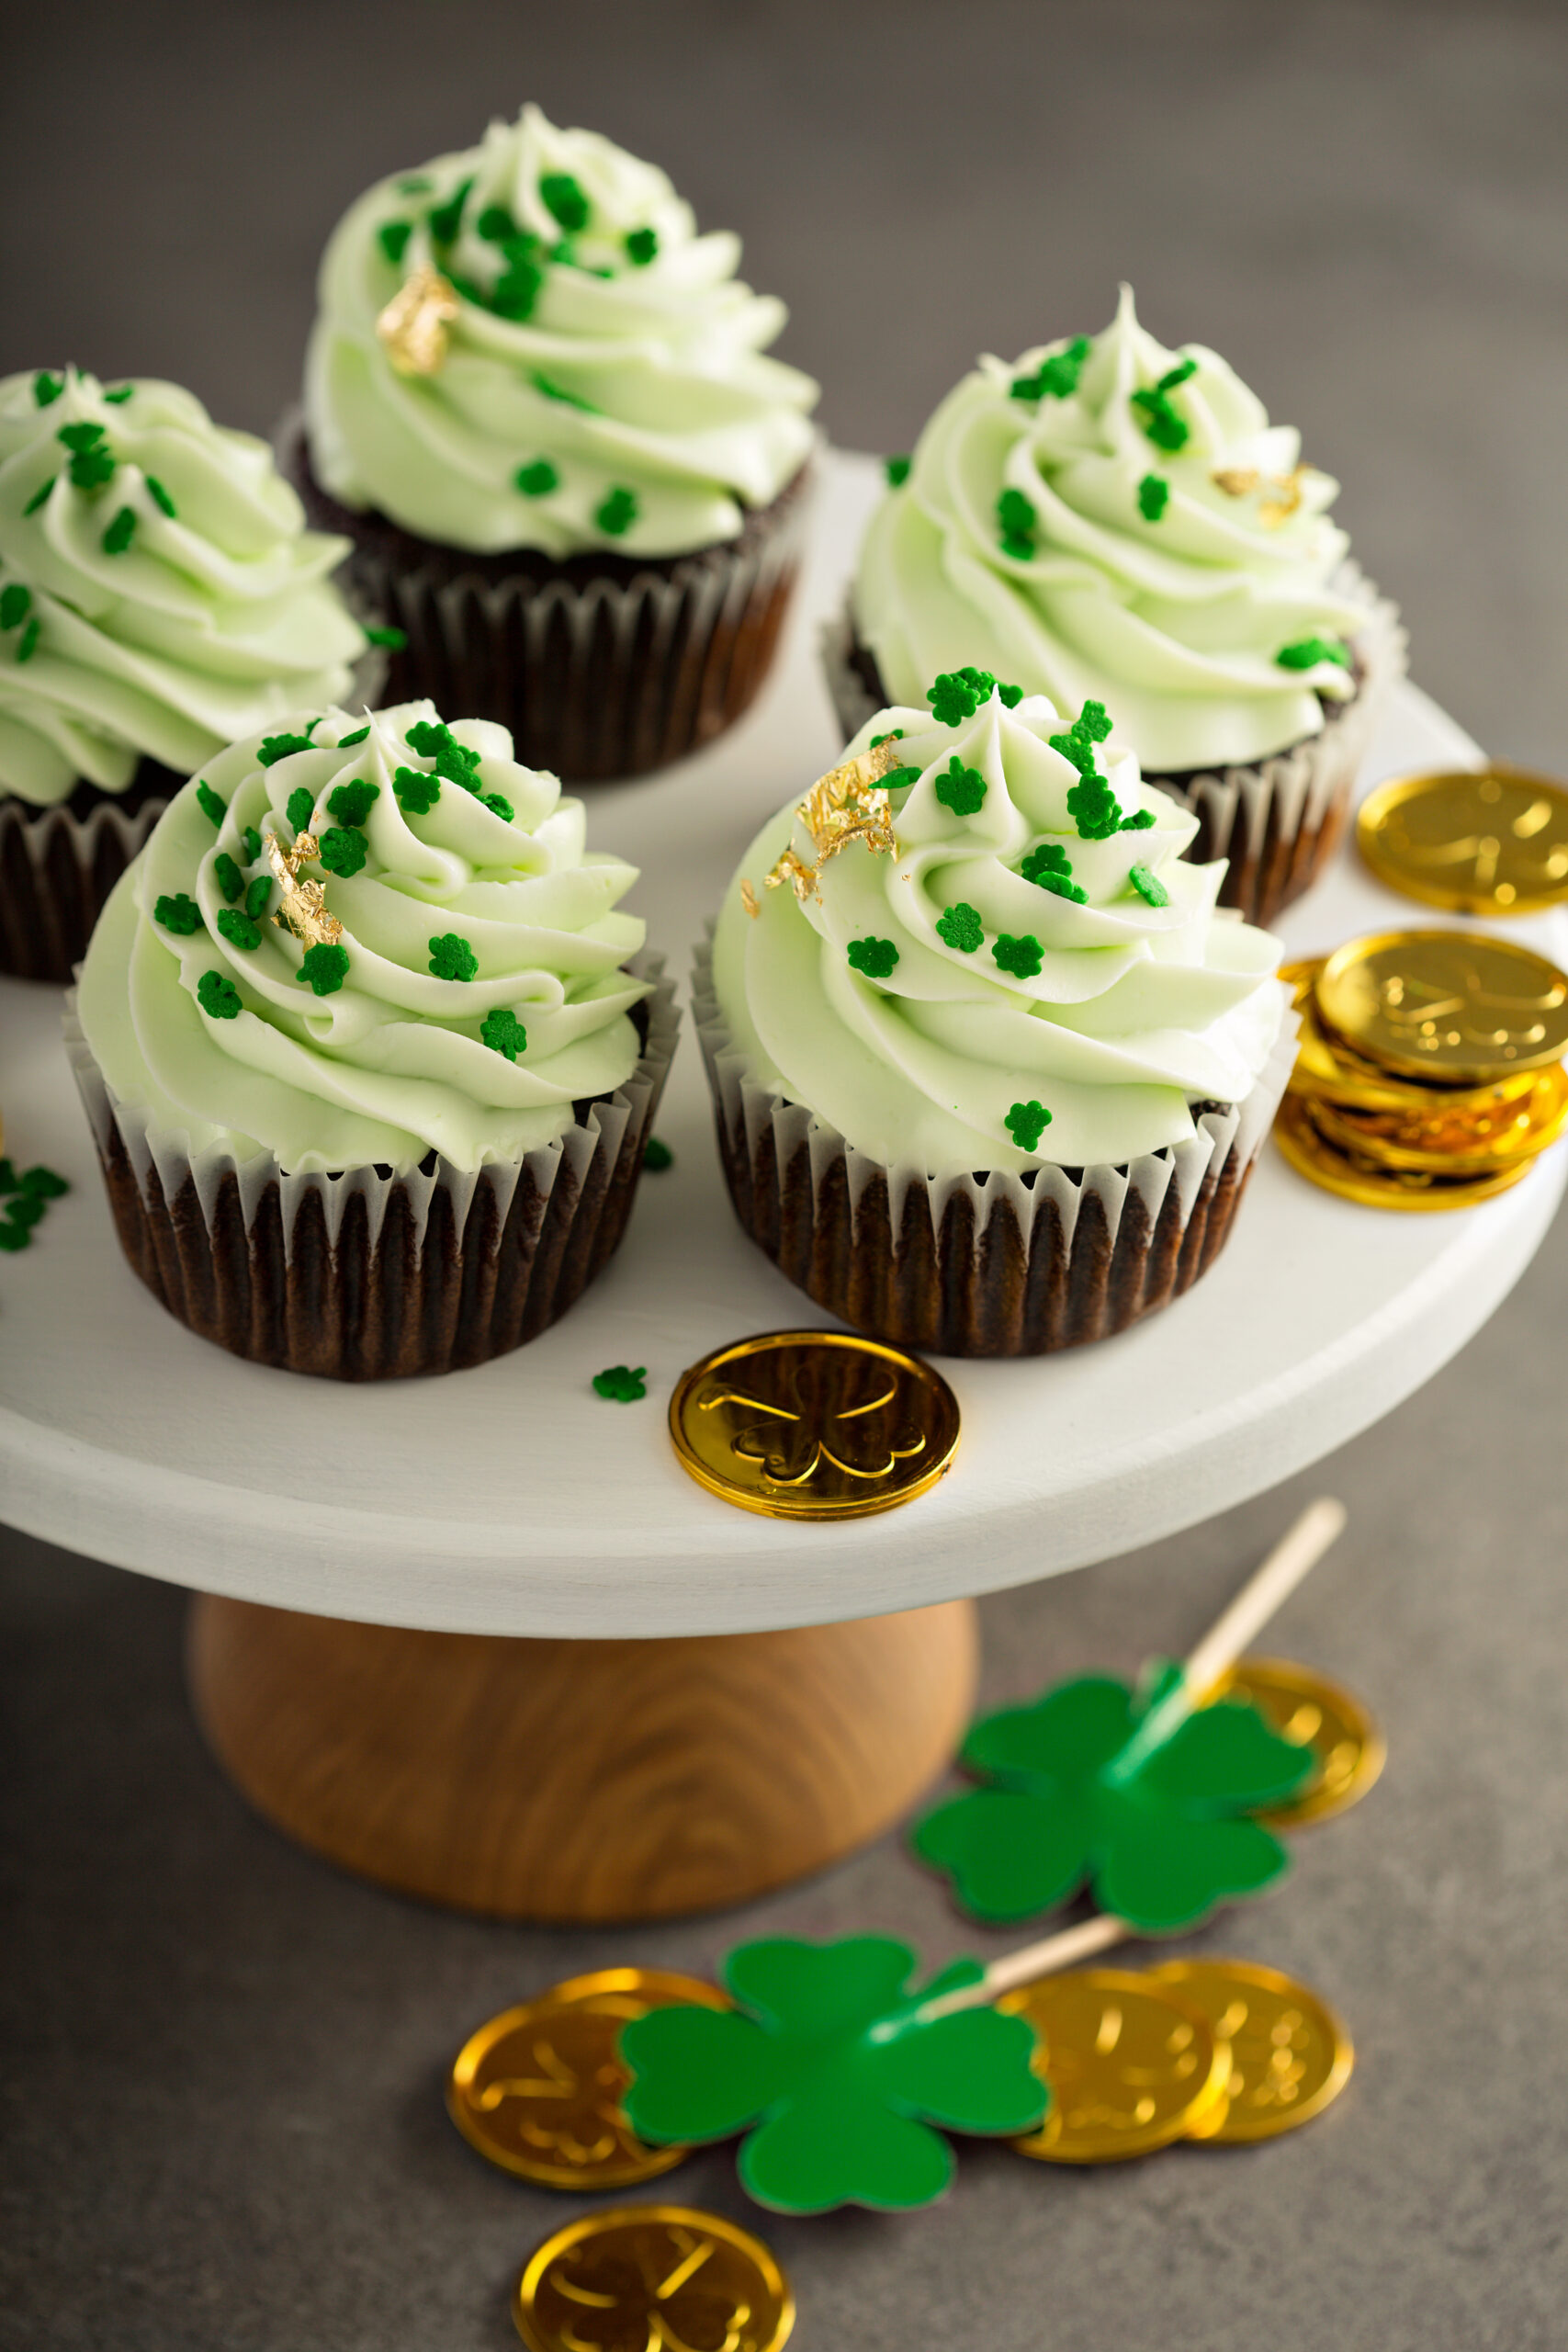 Saint Patrick day chocolate mint cupcakes with green frosting and golden leaf - Top 10 St. Patrick's Day Dessert Recipes; St. Patrick's day recipes for desserts along with other green recipes for this Irish holiday!